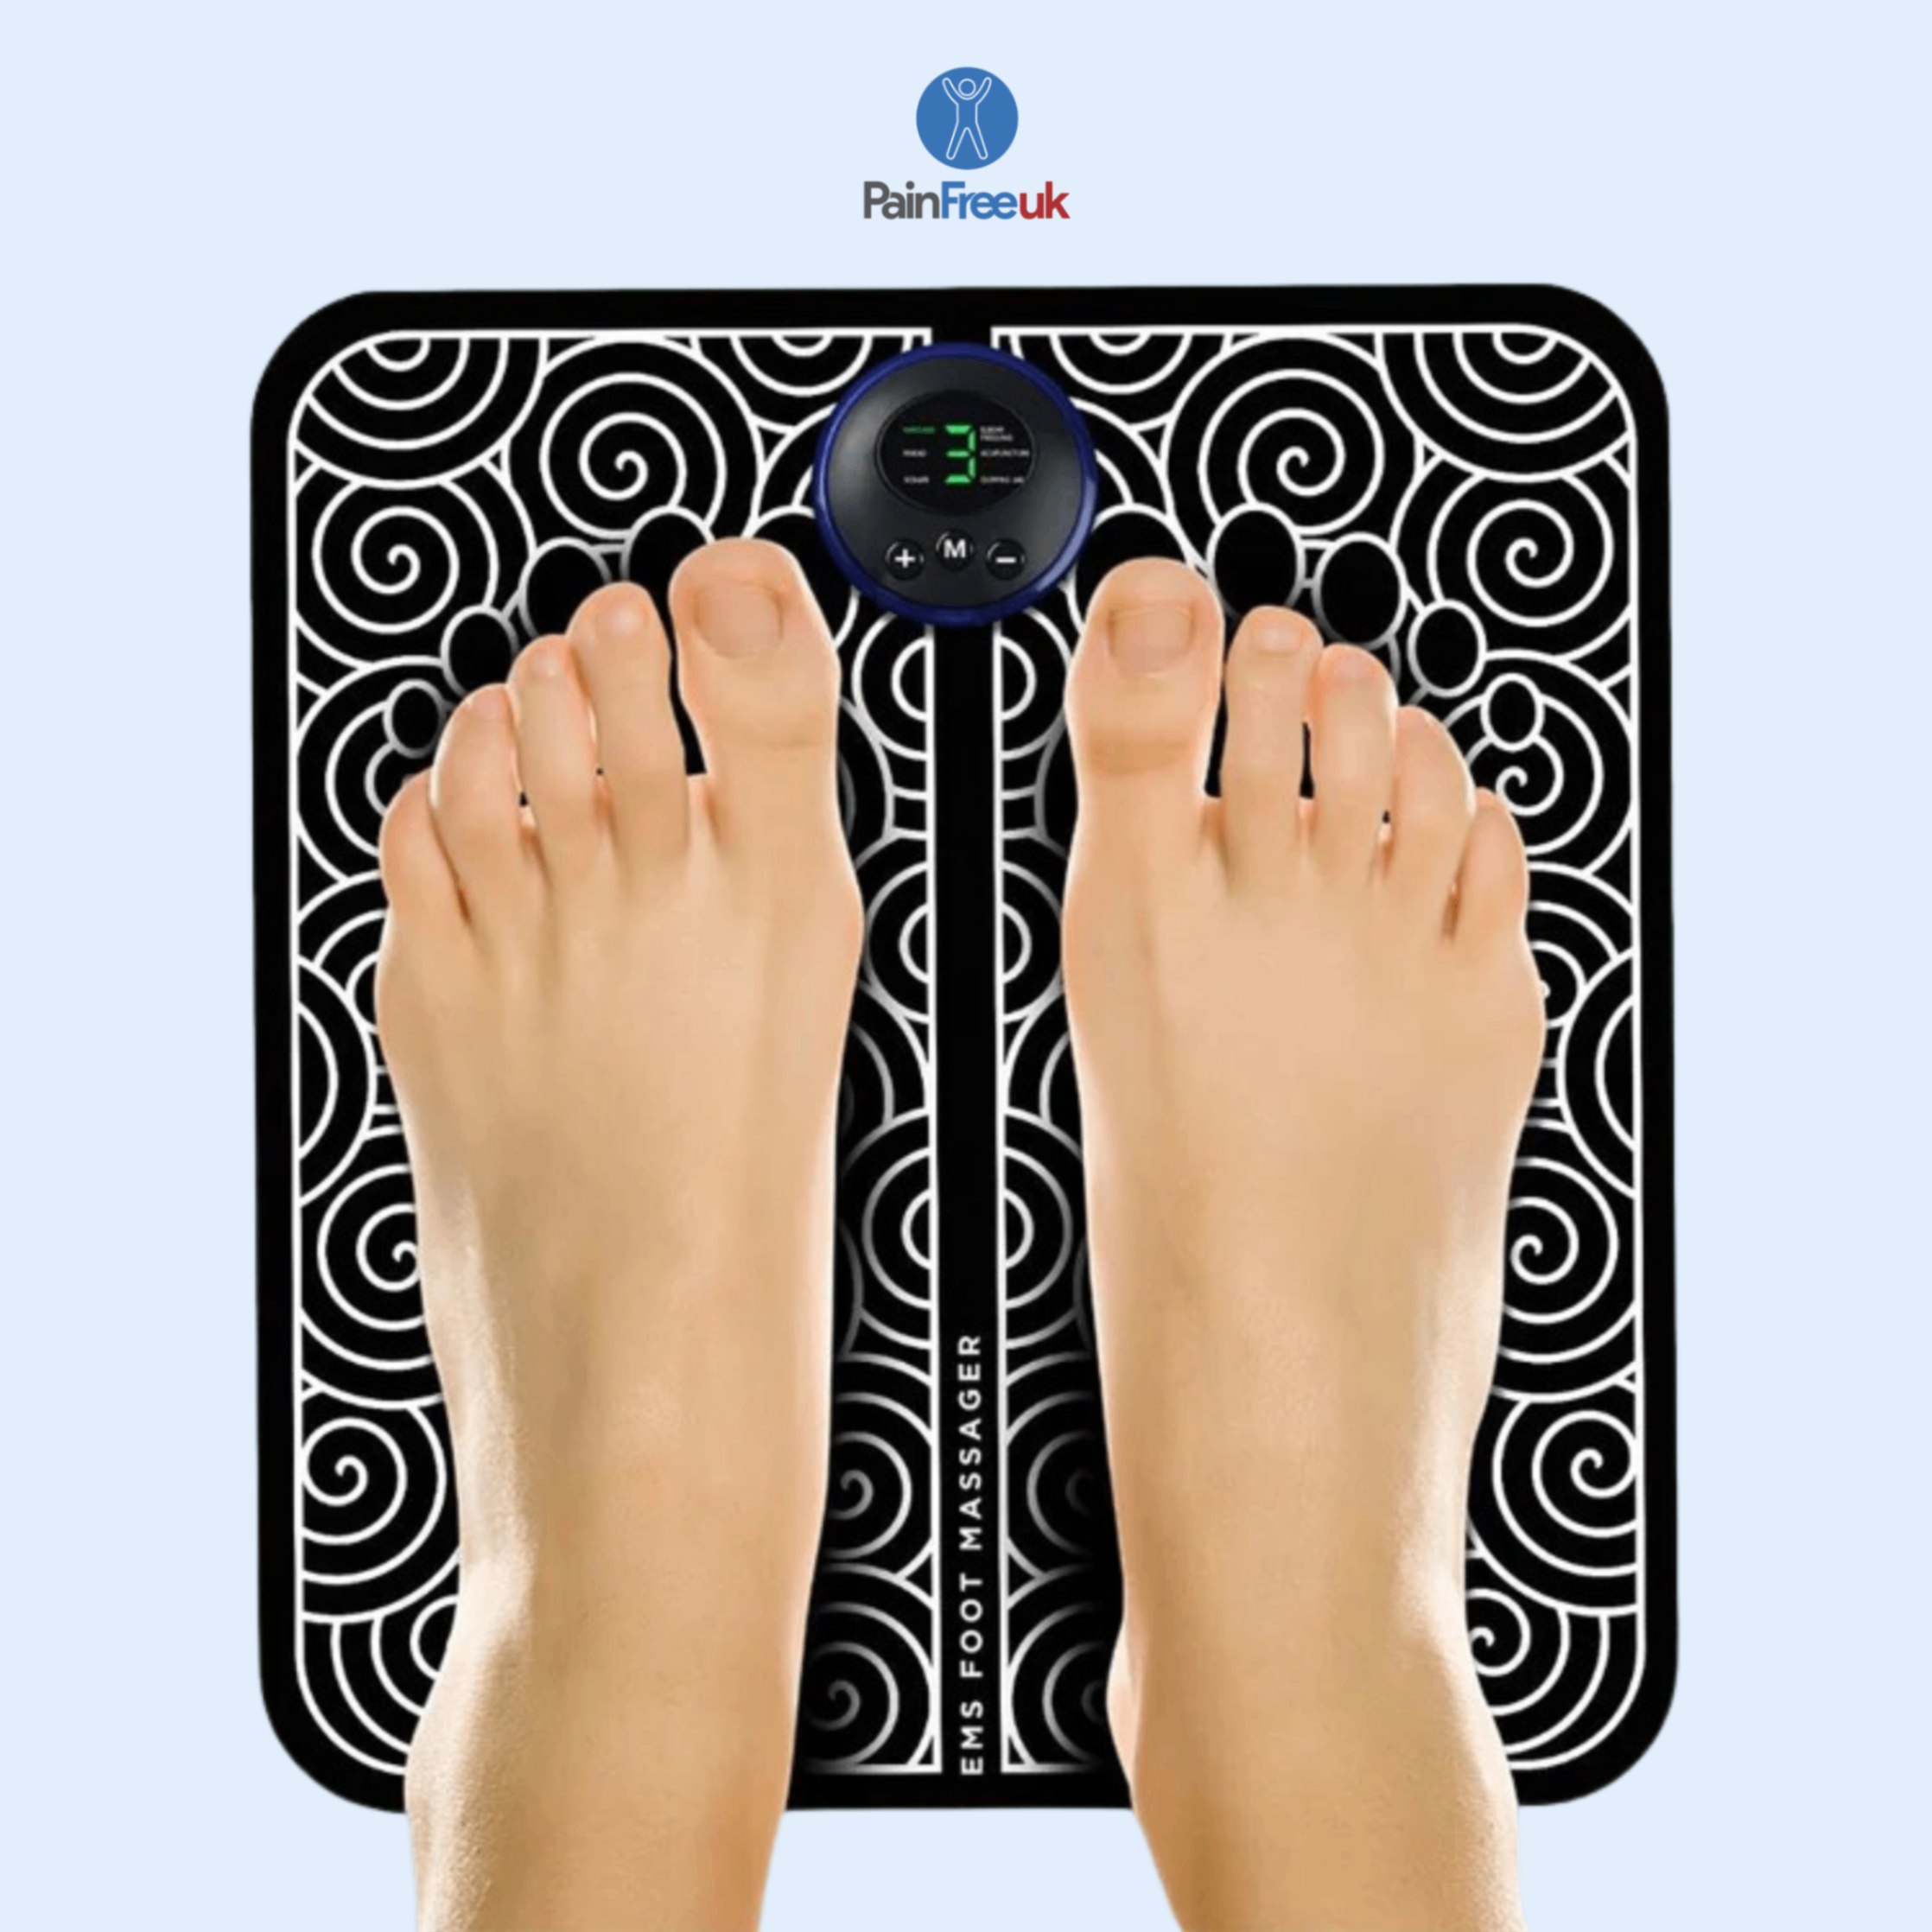 Pain Free UK™ Foot Massager - Quick Relief for Foot Pain in Just 15 Minutes a Day*